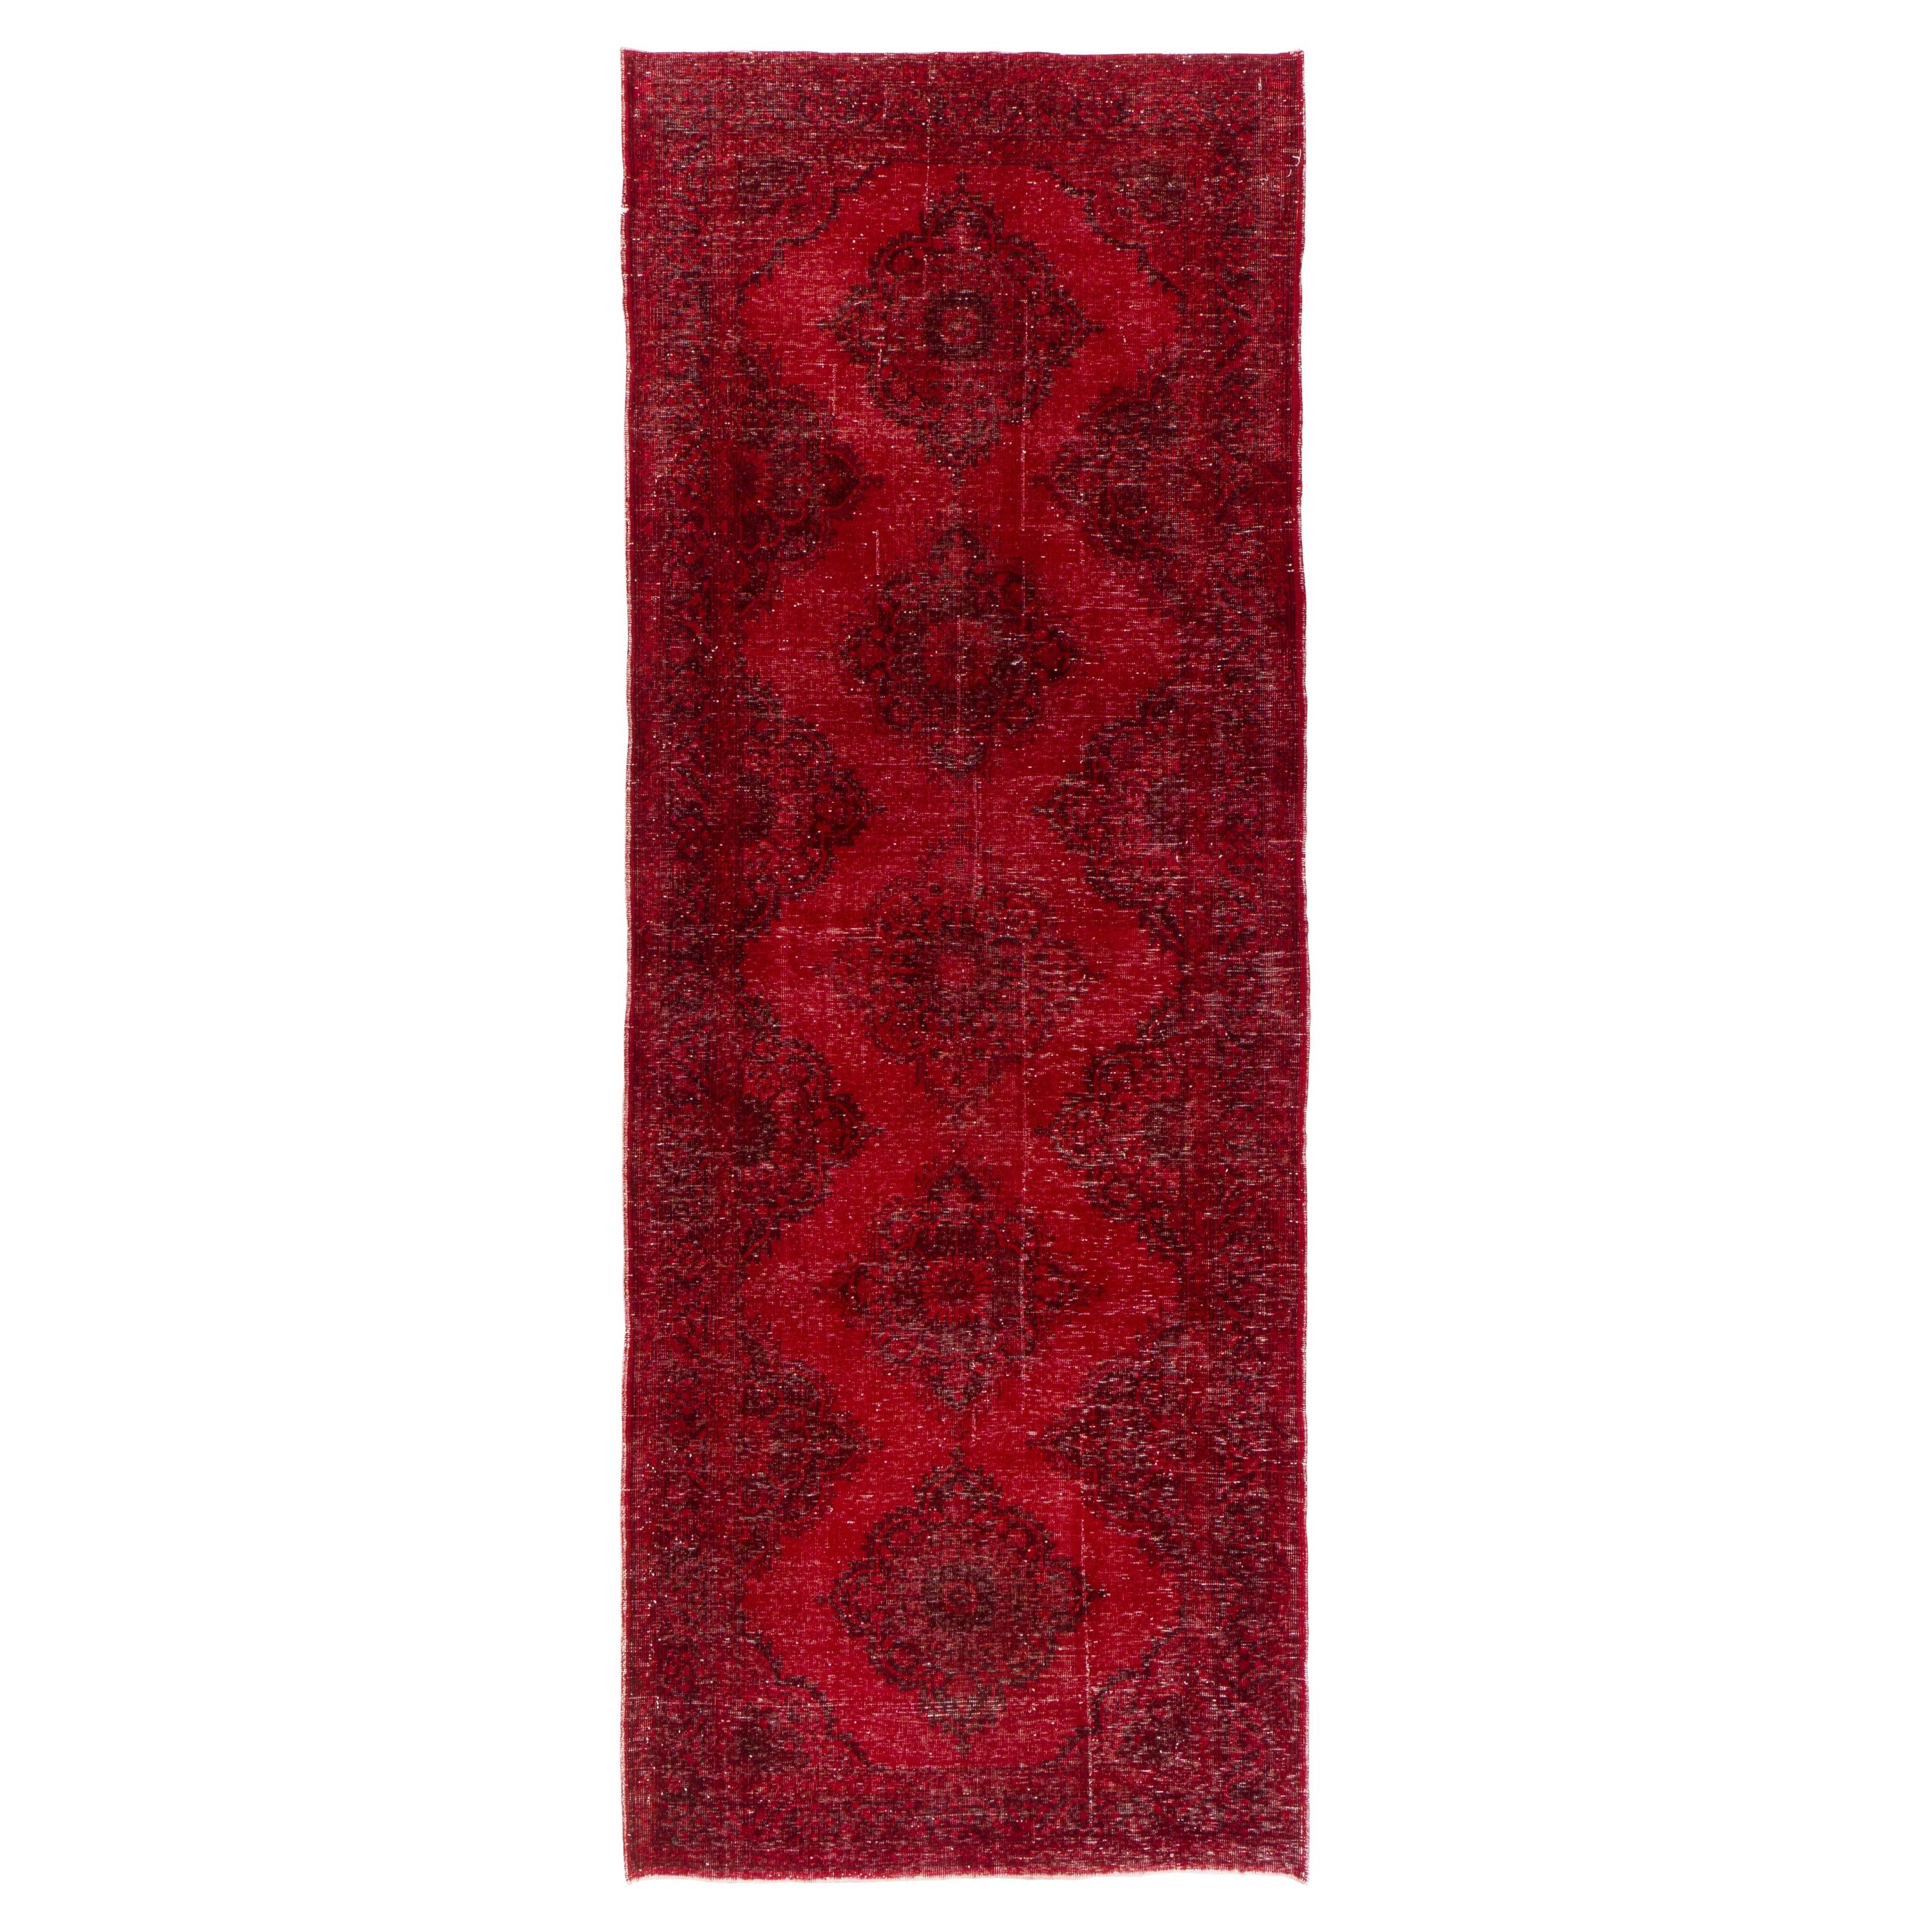 4.7x13 Ft Hand-Knotted Vintage Konya Sille Runner Rug Over-Dyed in Red Color